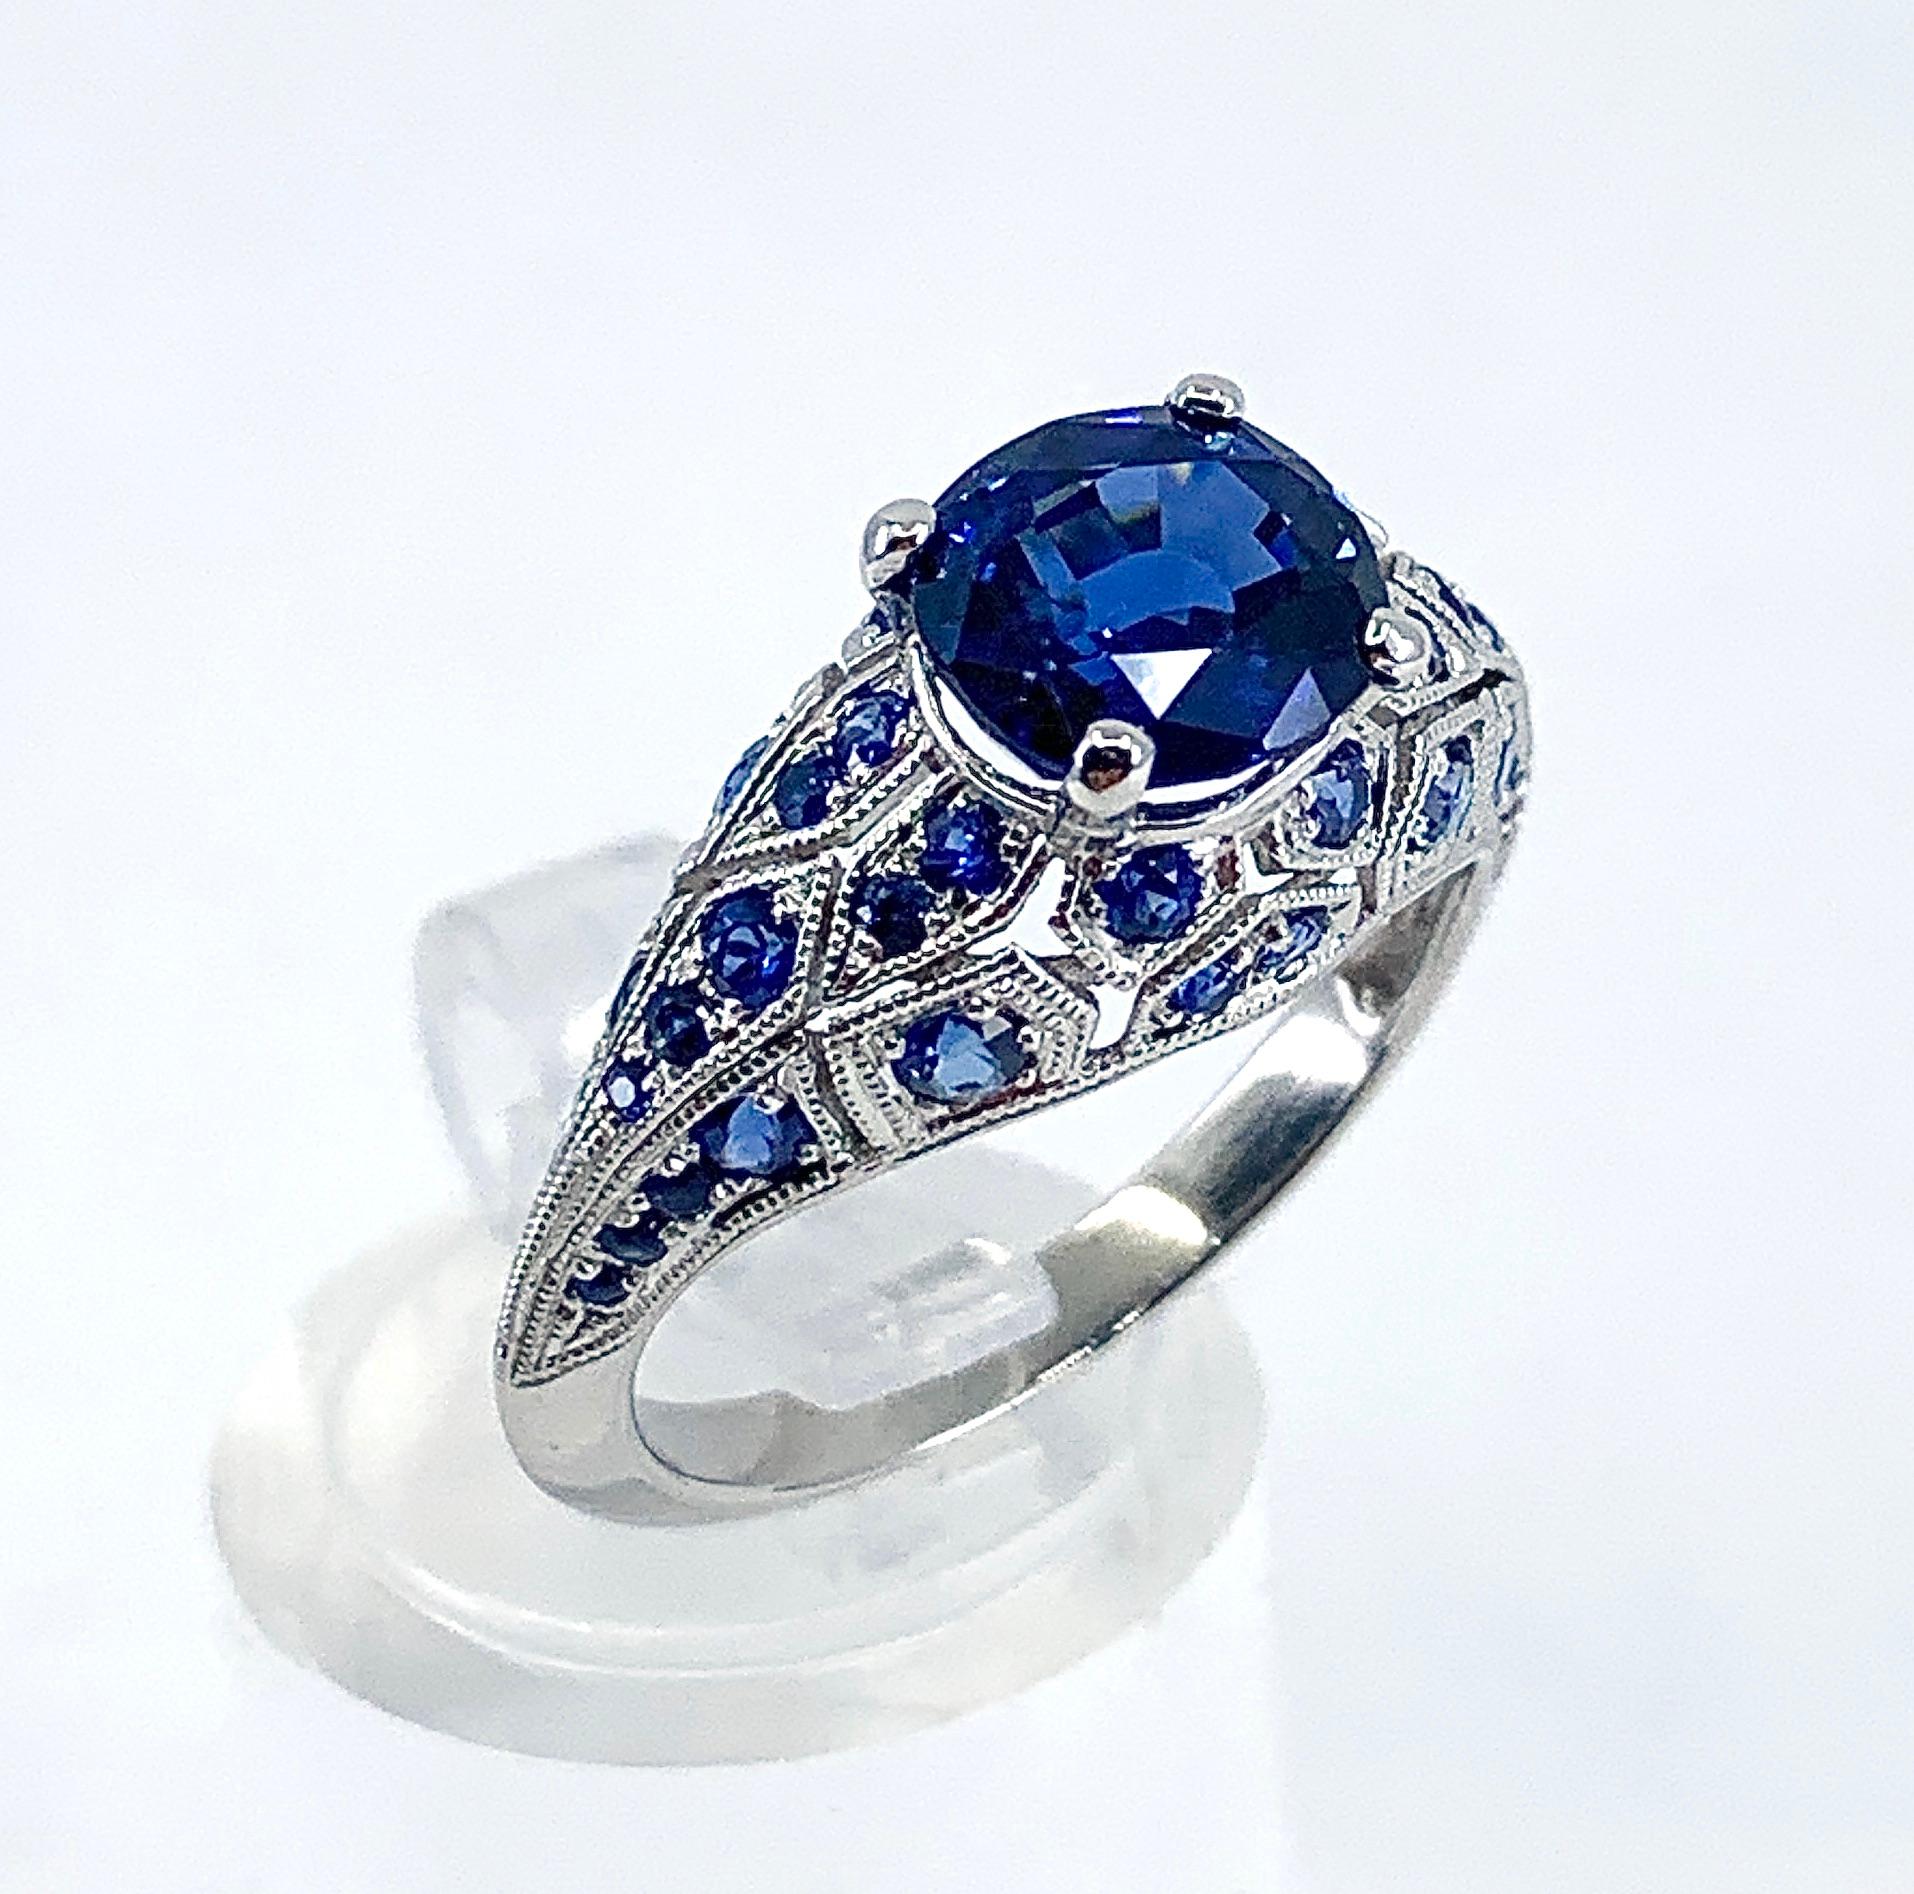 Women's or Men's GIA-Certified 1.99 Carat Oval Sapphire in Platinum Edwardian-Style Bombe Setting For Sale